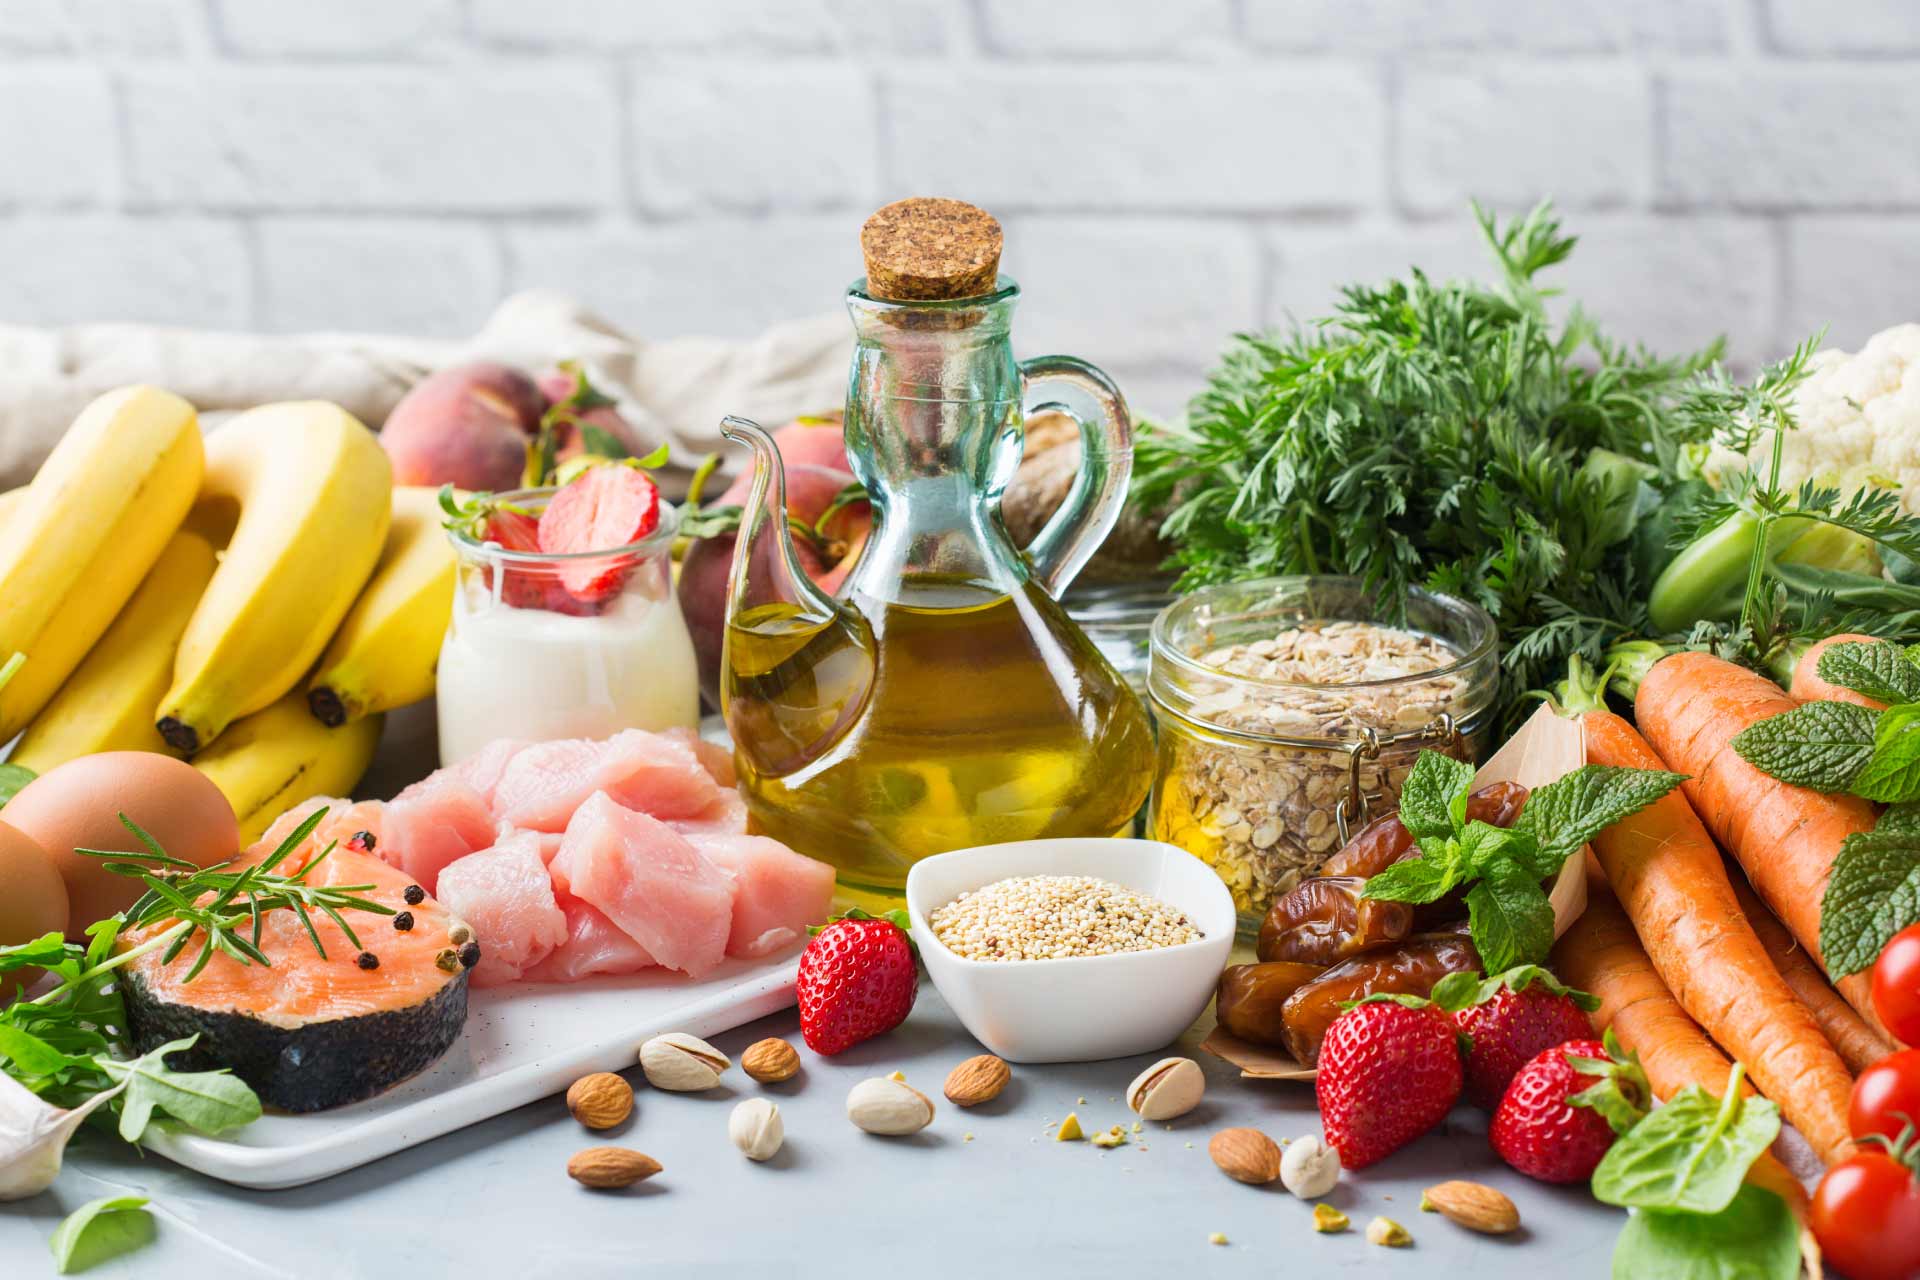 WEIGHT LOSS AND HEALTH BENEFITS OF THE MEDITERRANEAN DIET